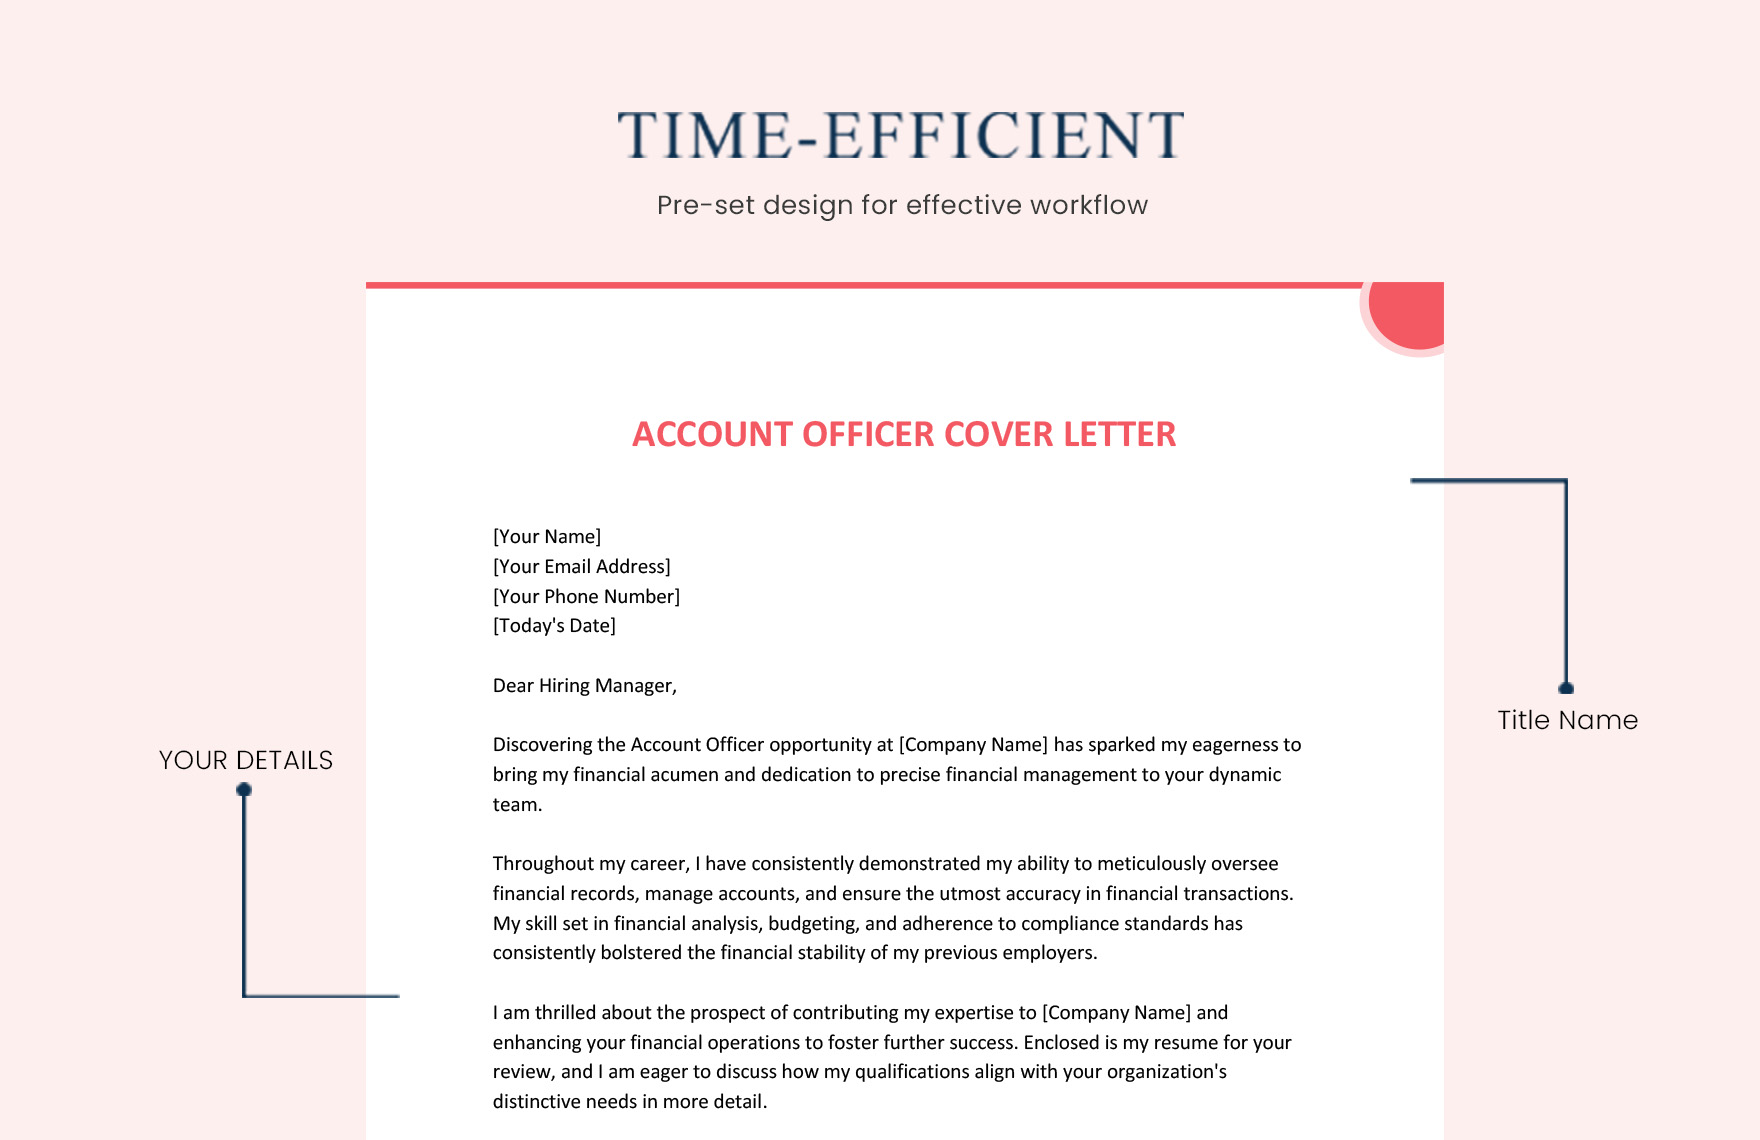 Account Officer Cover Letter